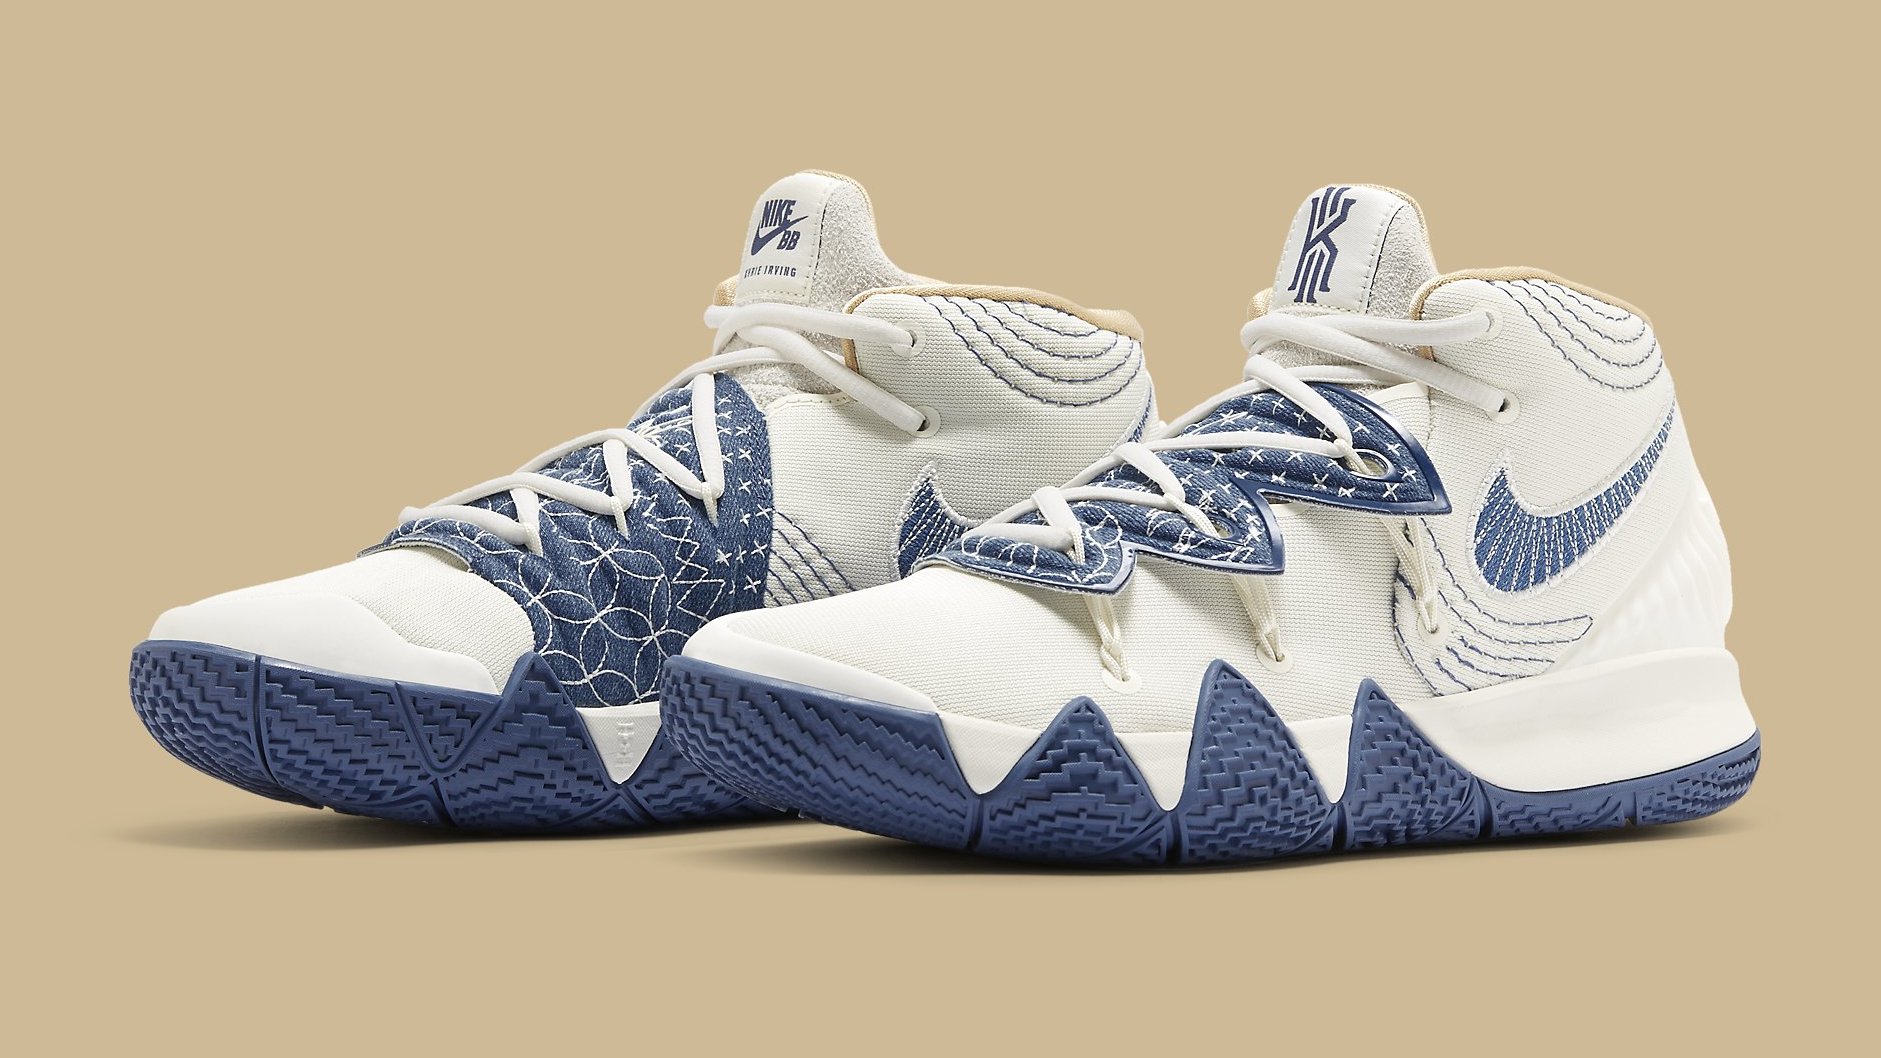 Kyrie Irving's 'Sashiko' Kybrid S2s Are Releasing Soon | Complex